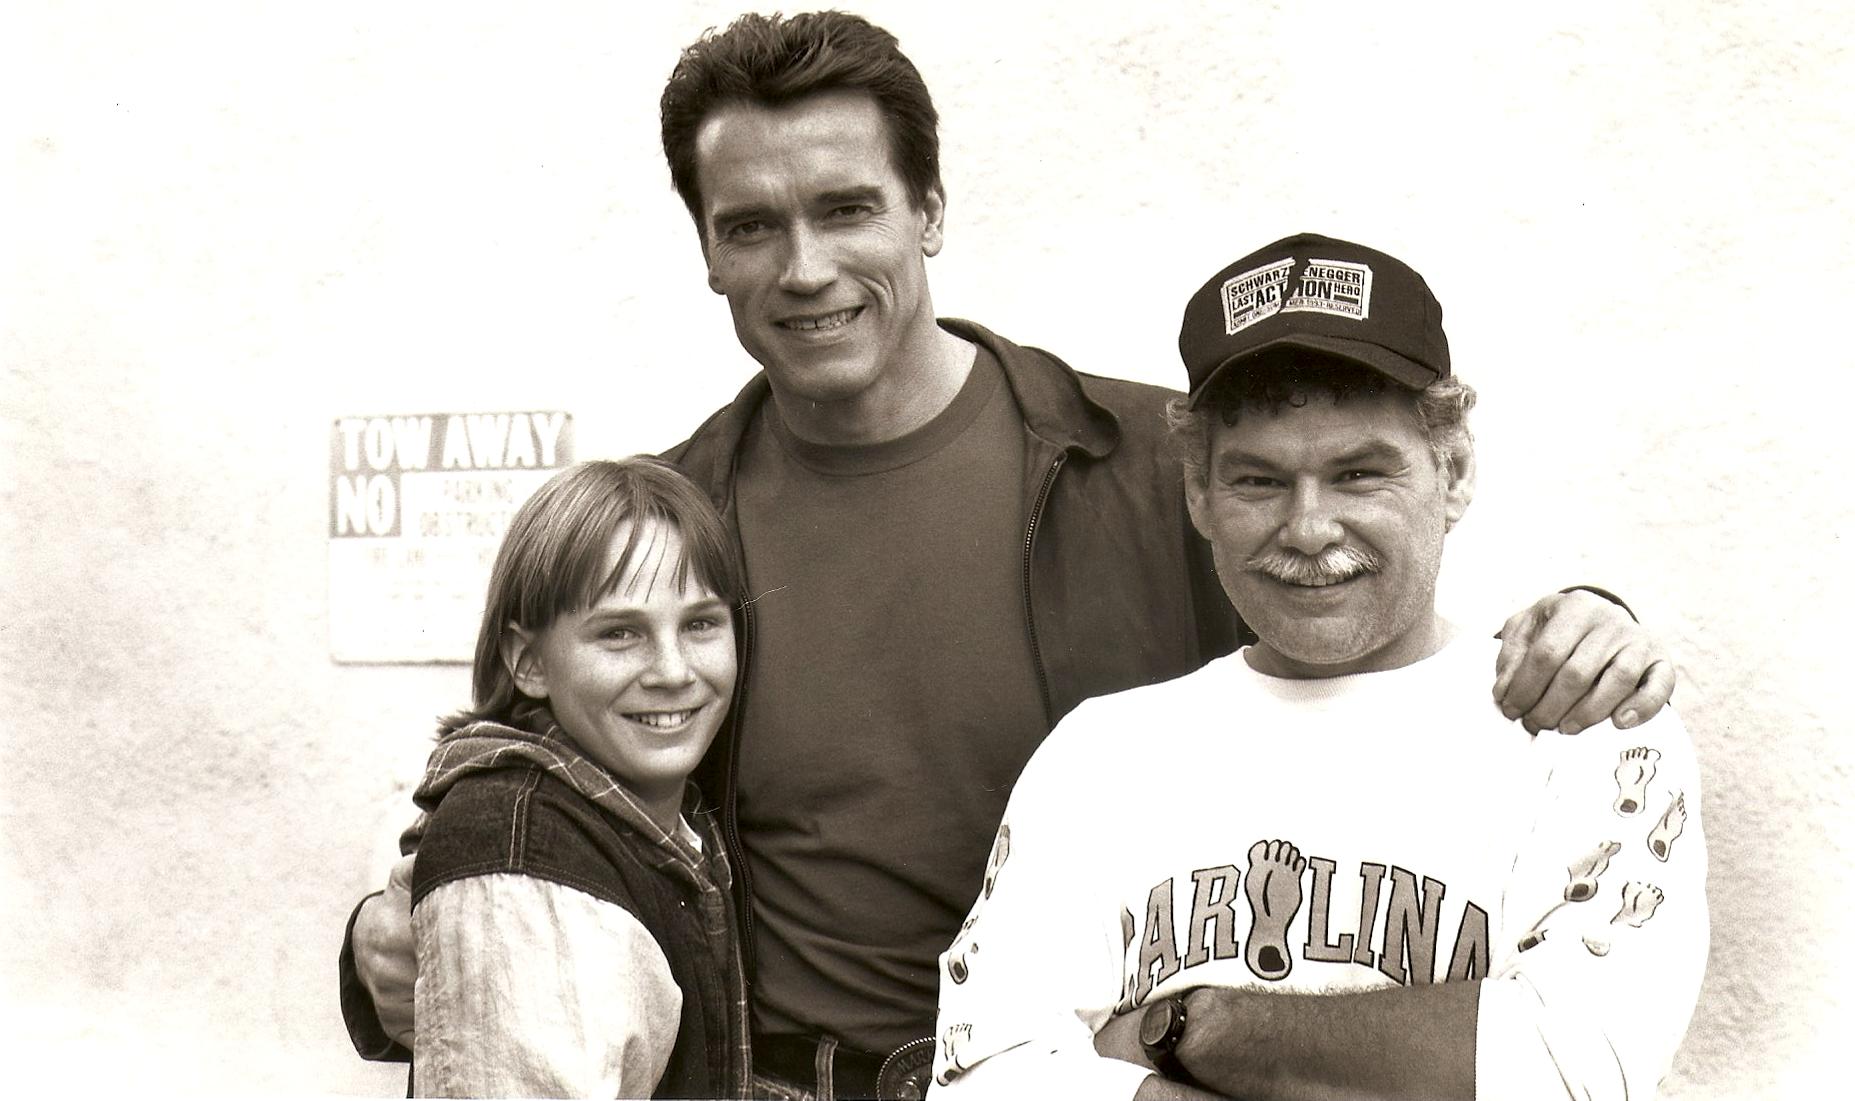 Mike Muscat with Arnold Schwarzenegger and Austin O'Brien on the set of Last Action Hero.